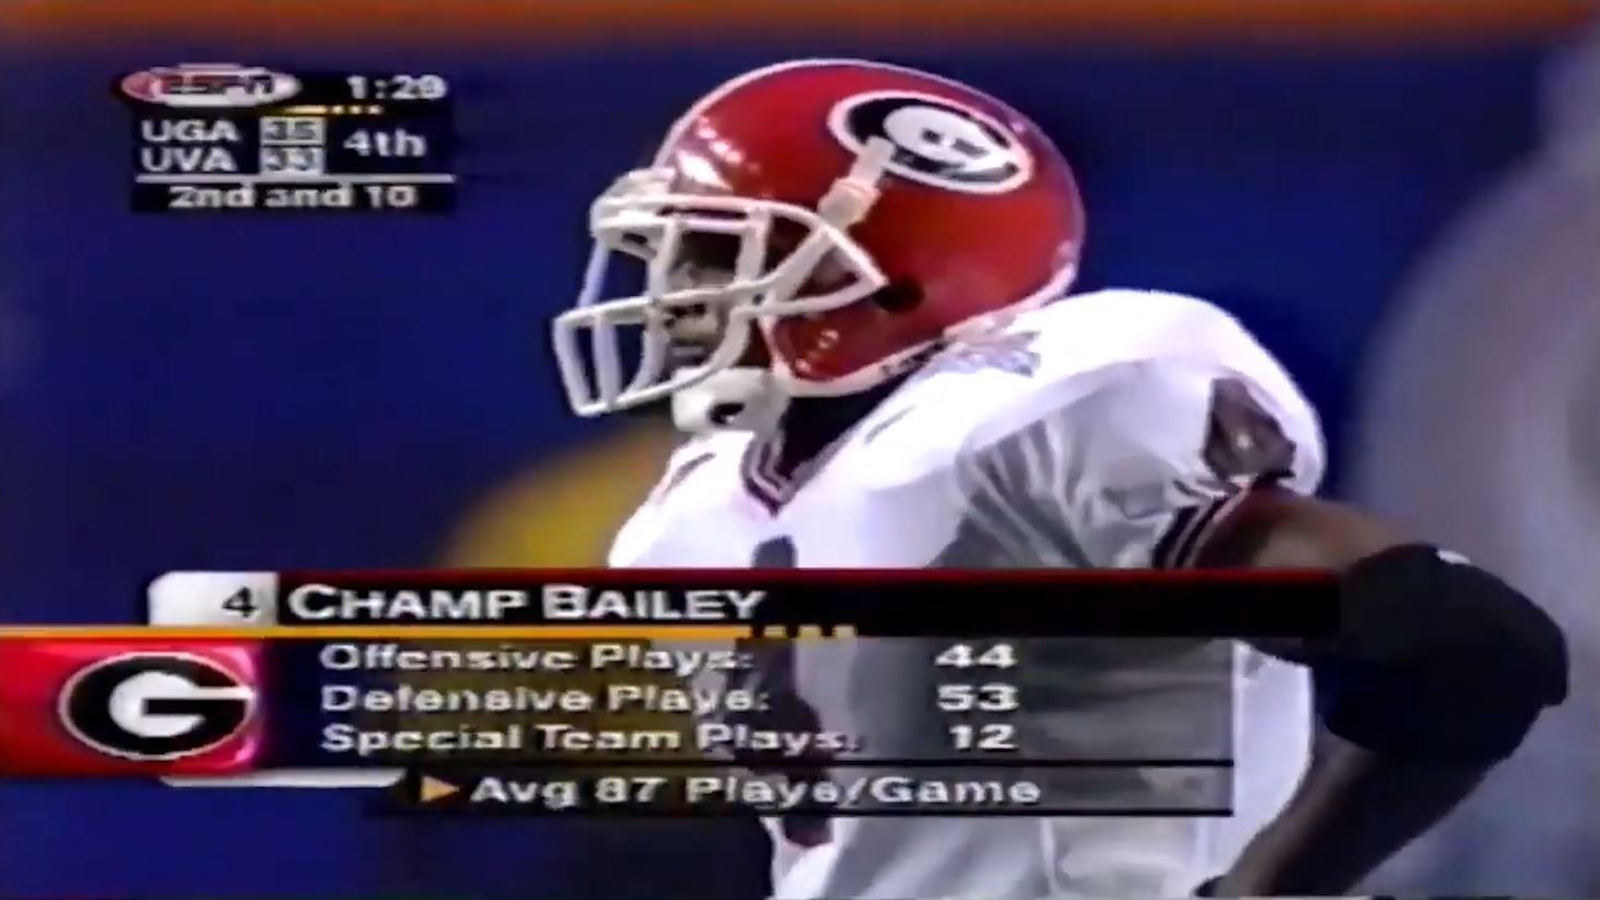 Champ Bailey was even better than you remember